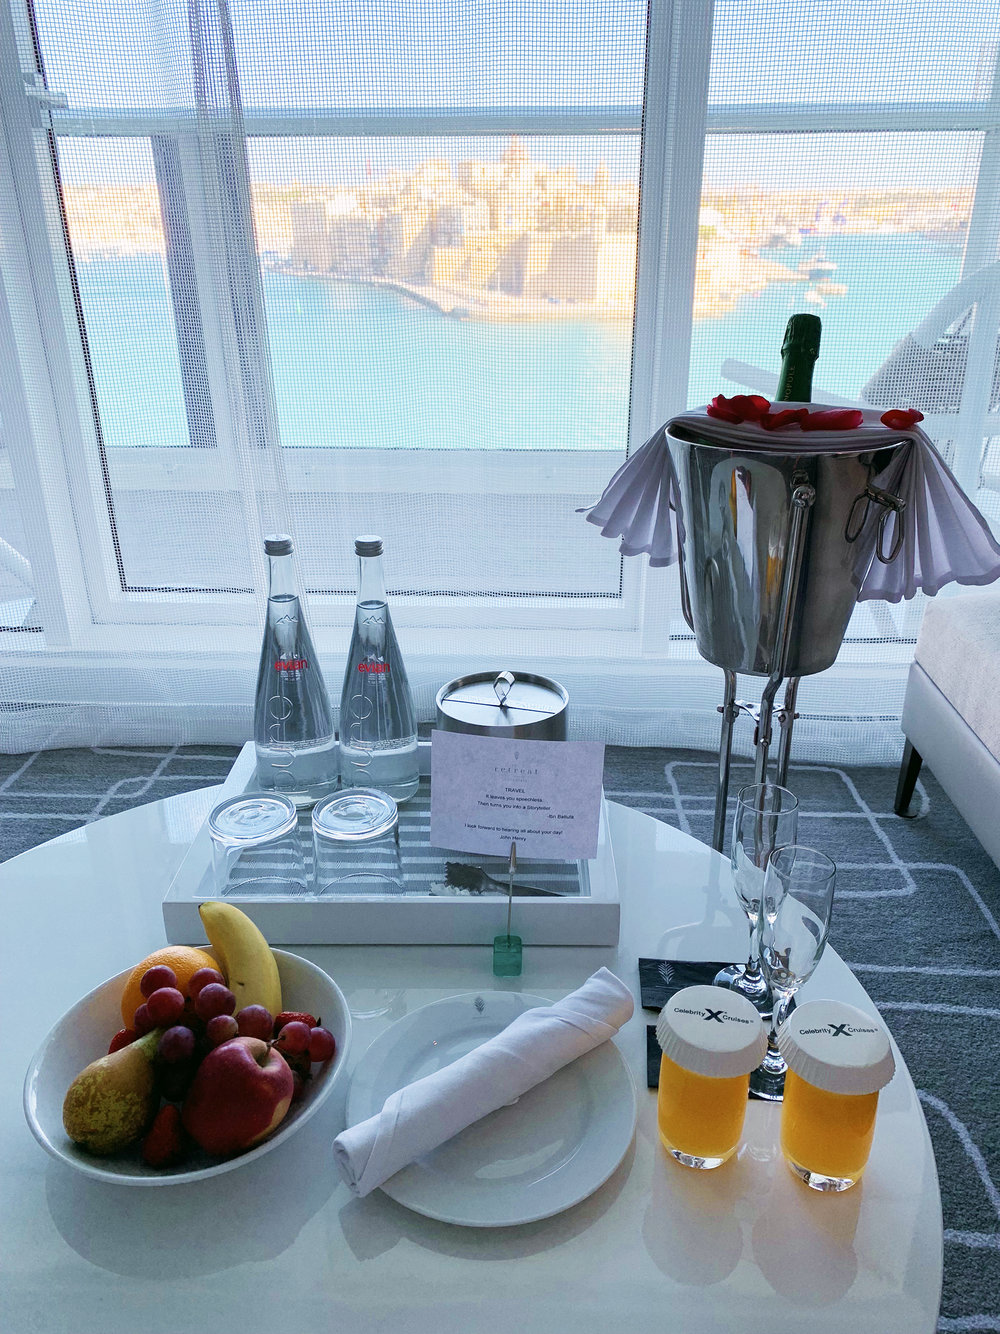  Daily touches from our butler, John Henry. Oh, and the OJ was fresh-squeezed! 